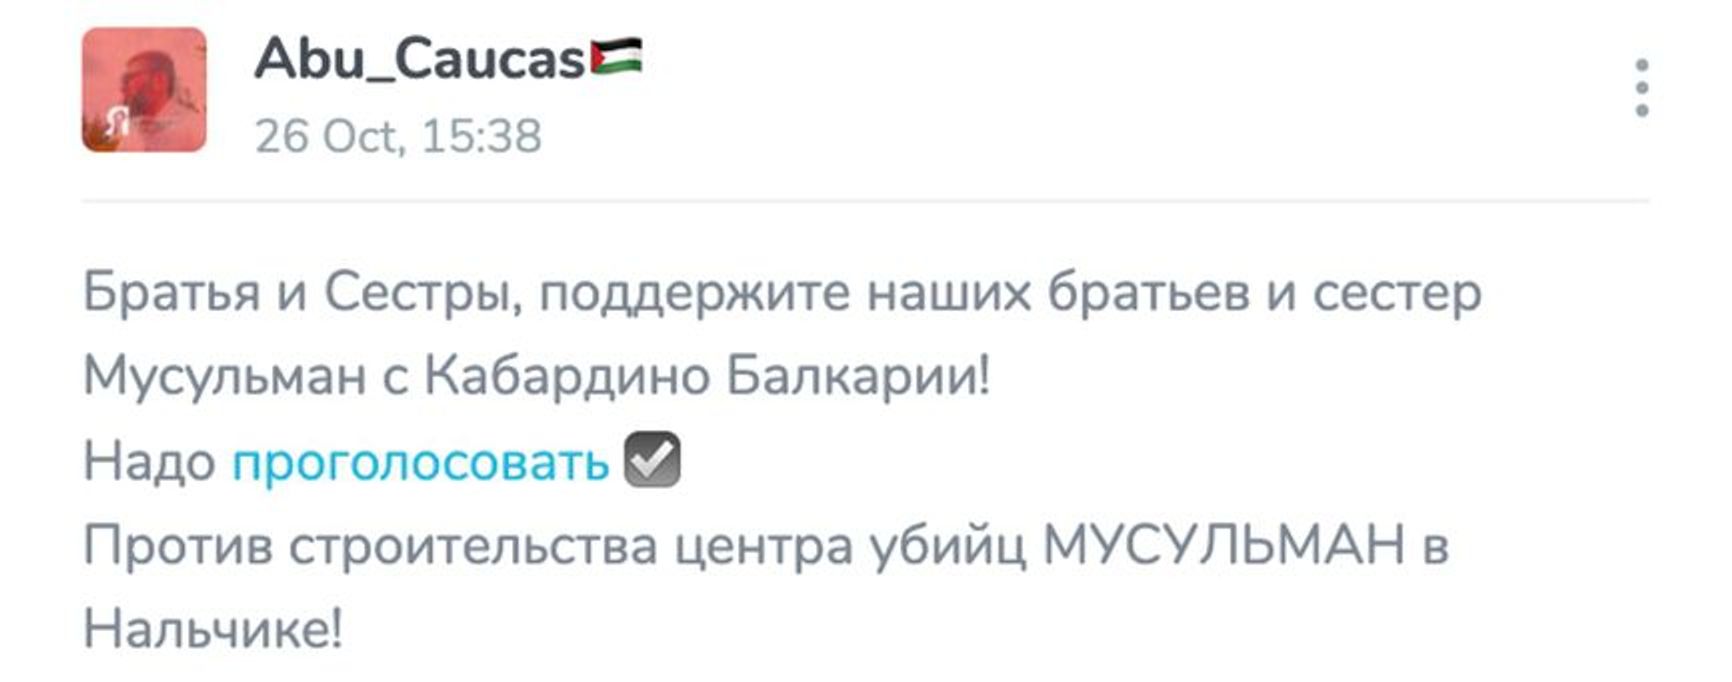 Brothers and sisters, support our Muslim brothers and sisters from Kabardino-Balkaria! You have to vote against the construction of a center for killing MUSLIMS in Nalchik! — Archived copy of a message in the Telegram channel Abu_Caucas, October 26